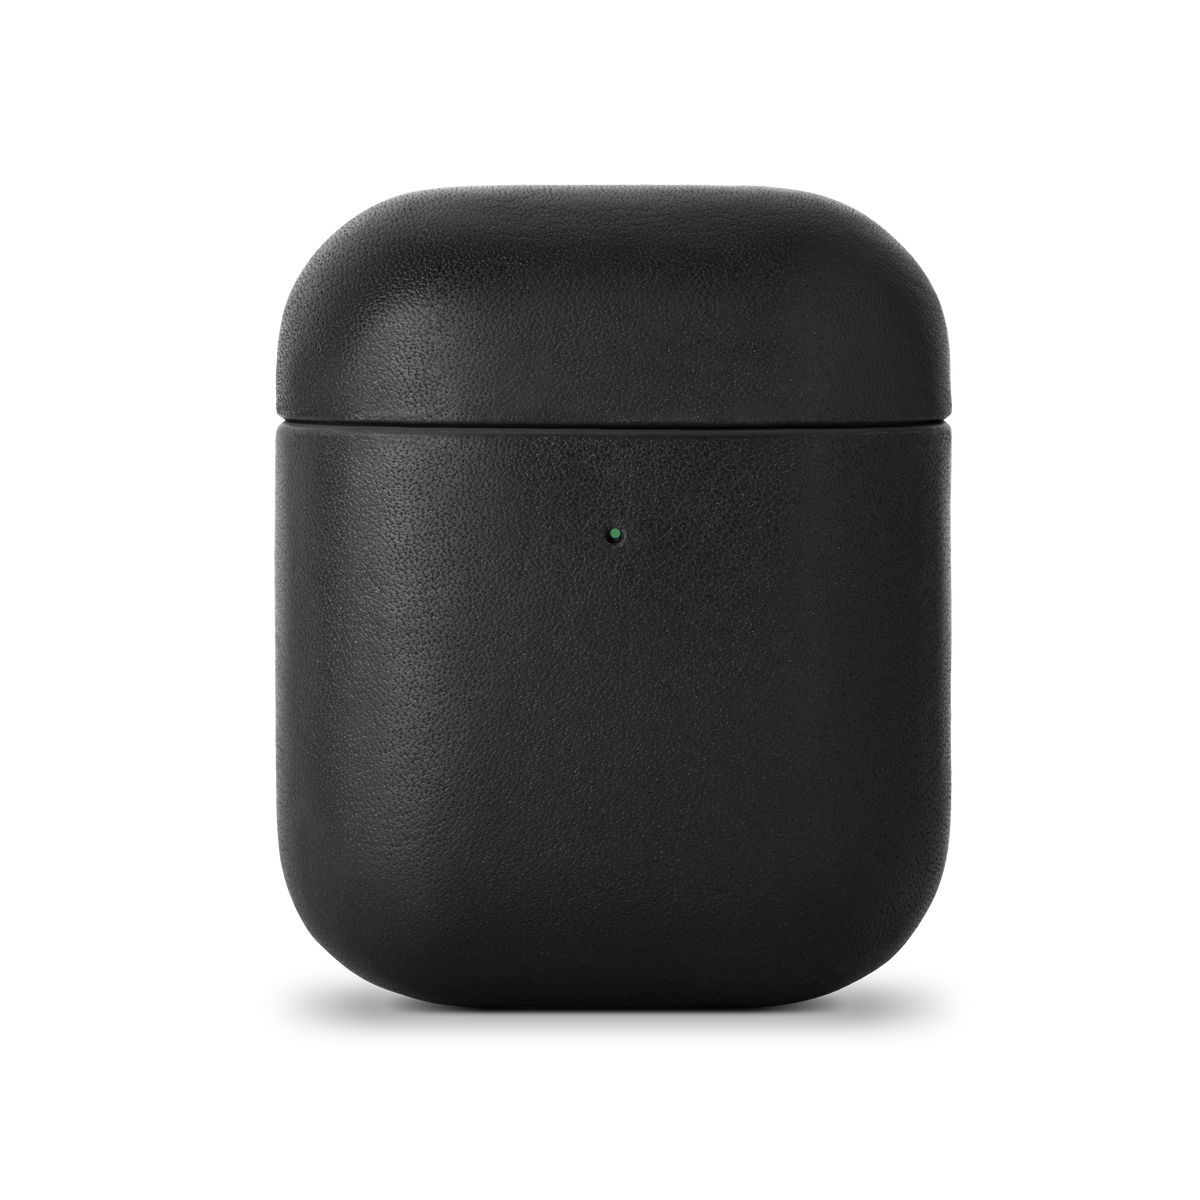 NATIVE UNION Classic Leather Case for Airpods - Black